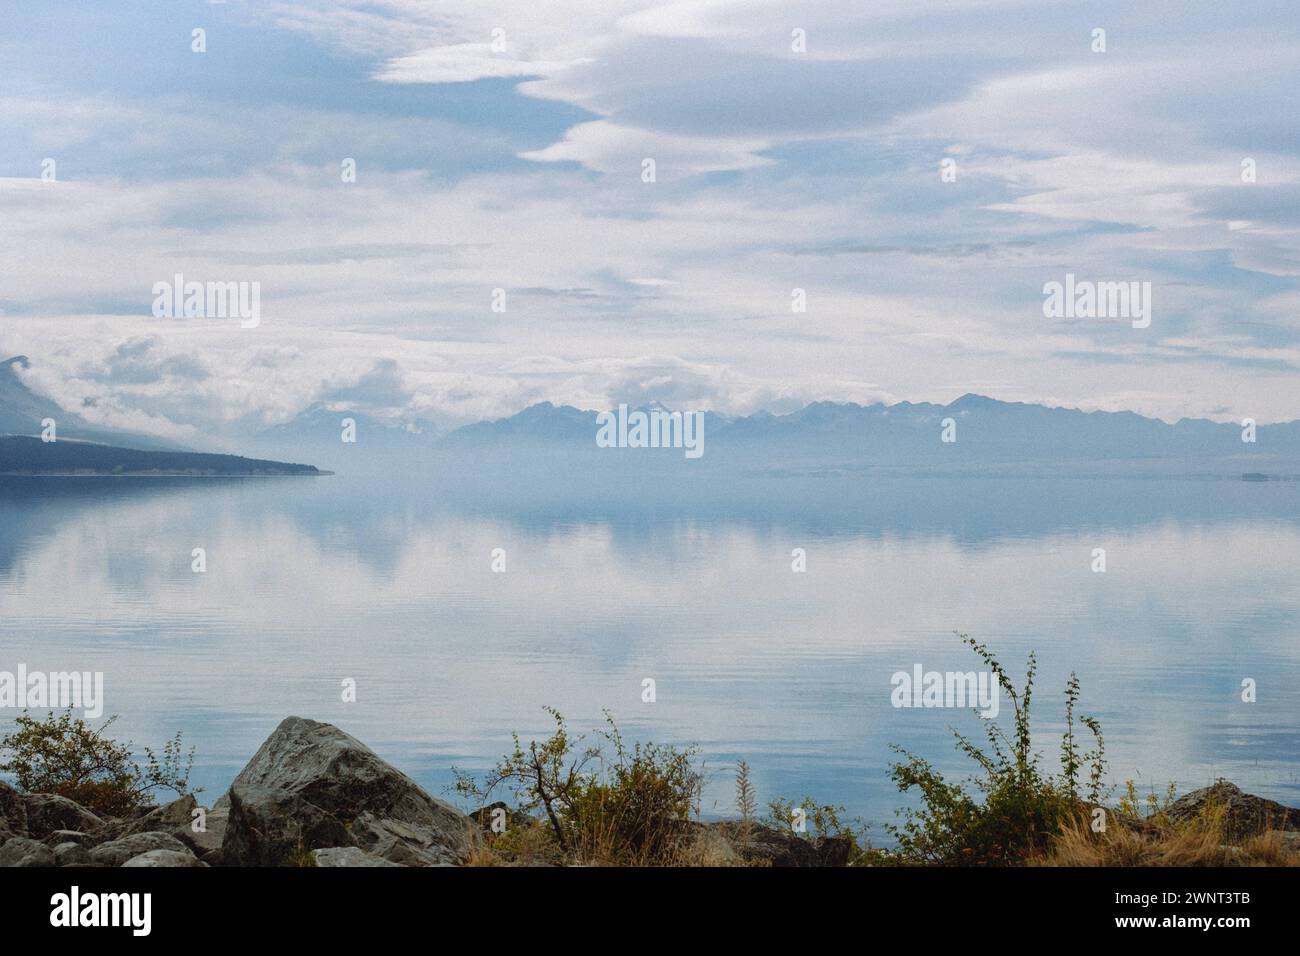 Scenic water reflection of cloudy sky with rocky border Stock Photo